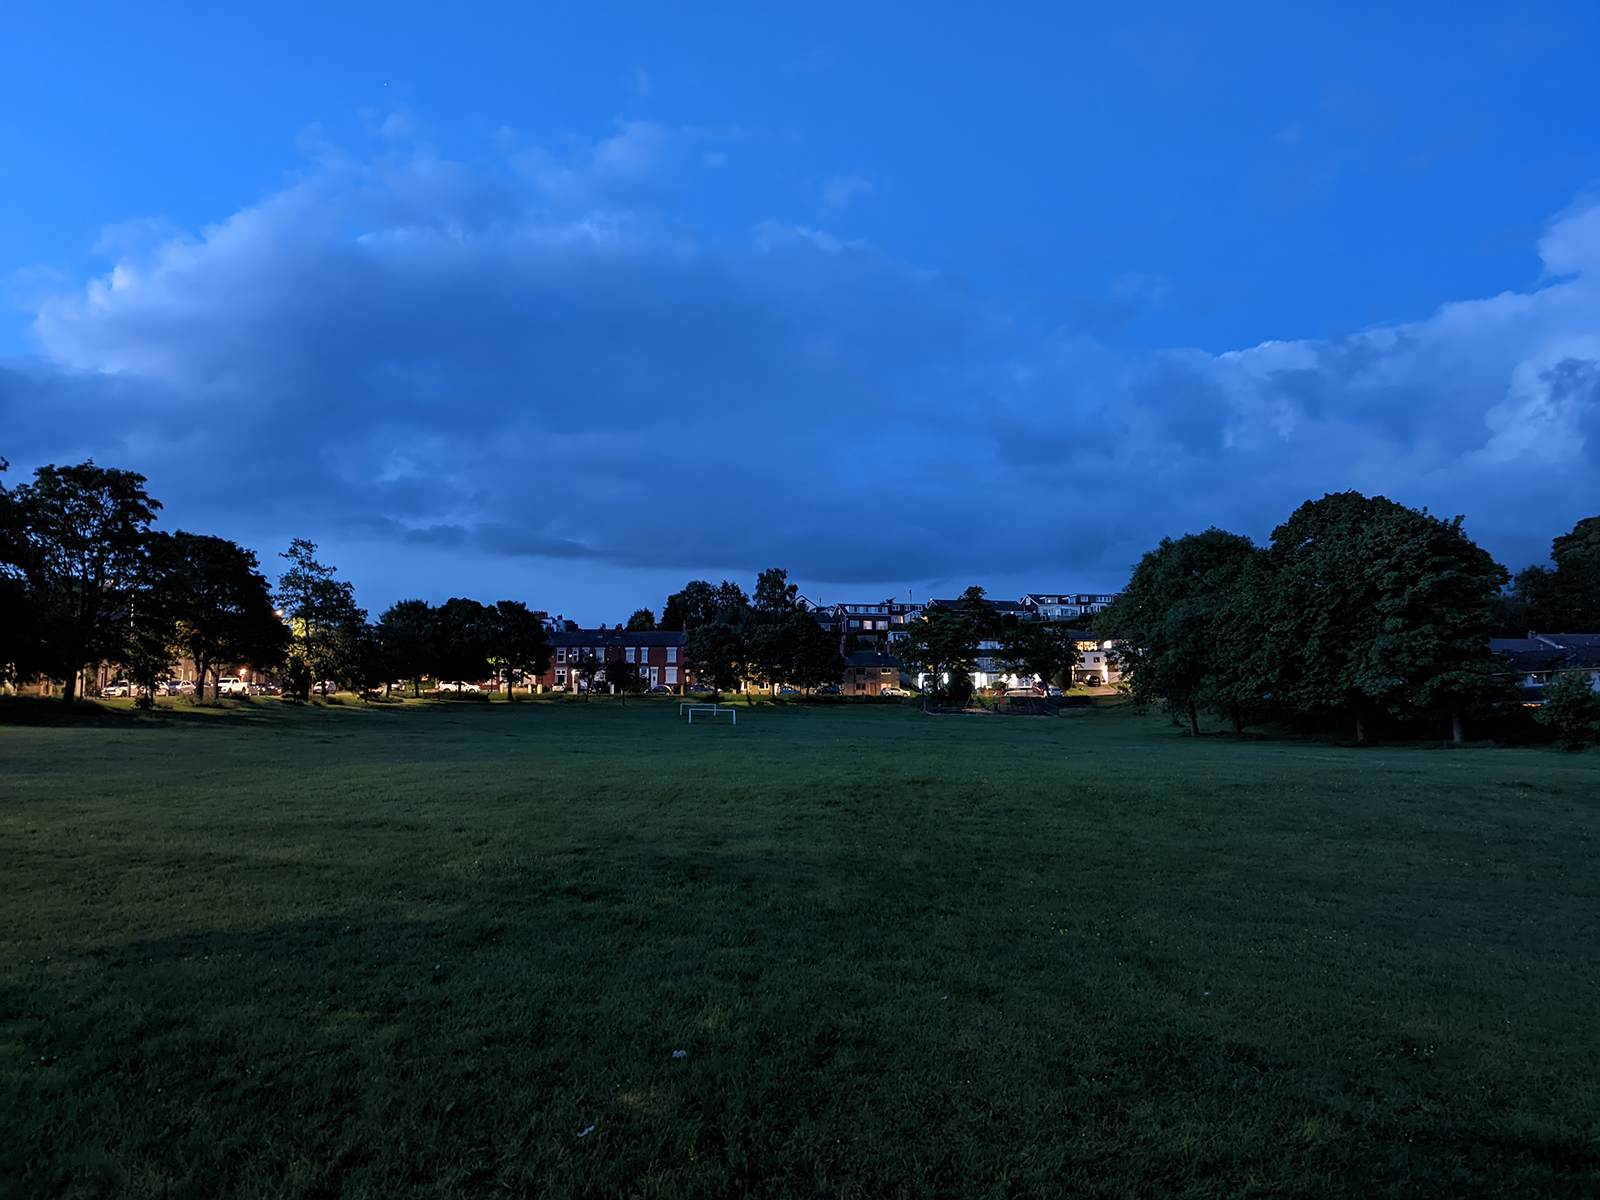 Realme 9 camera sample showing an open field at night (taken by the Google Pixel 6 Pro)